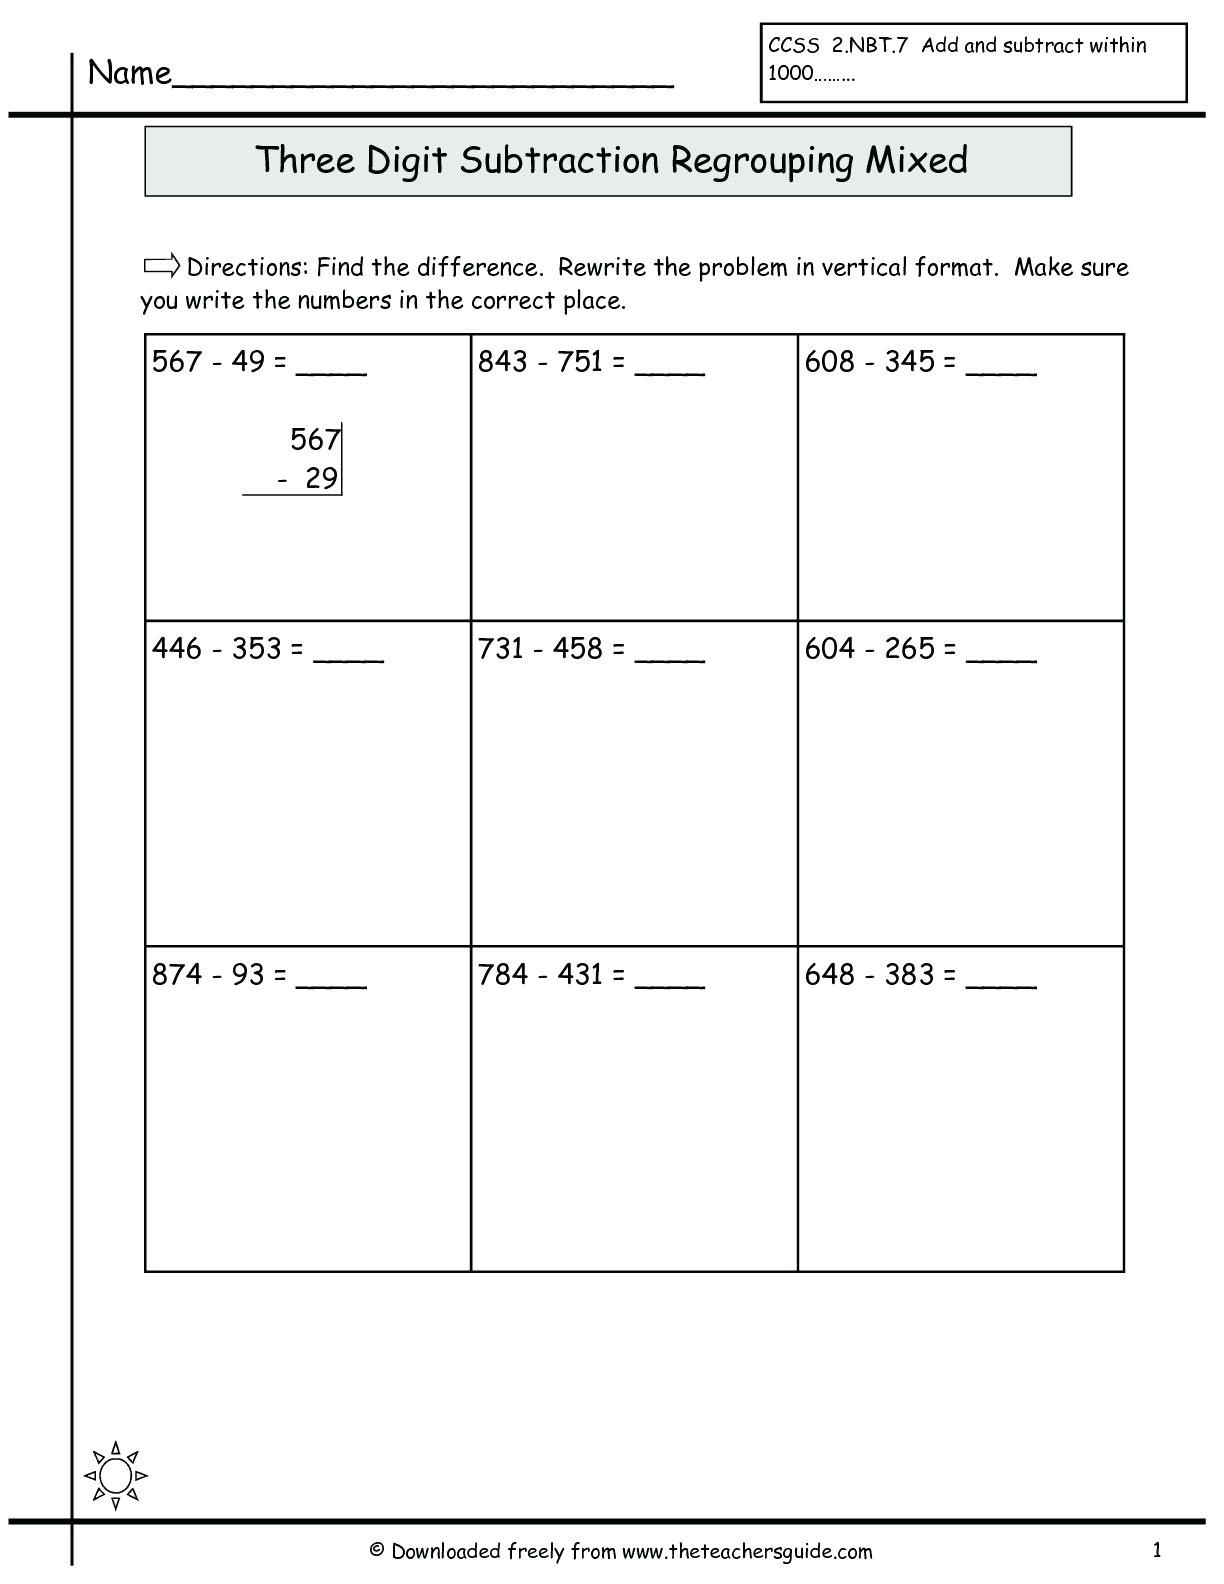 Free Math Worksheets Second Grade 2 Addition Add 2 2 Digit Numbers No Regrouping